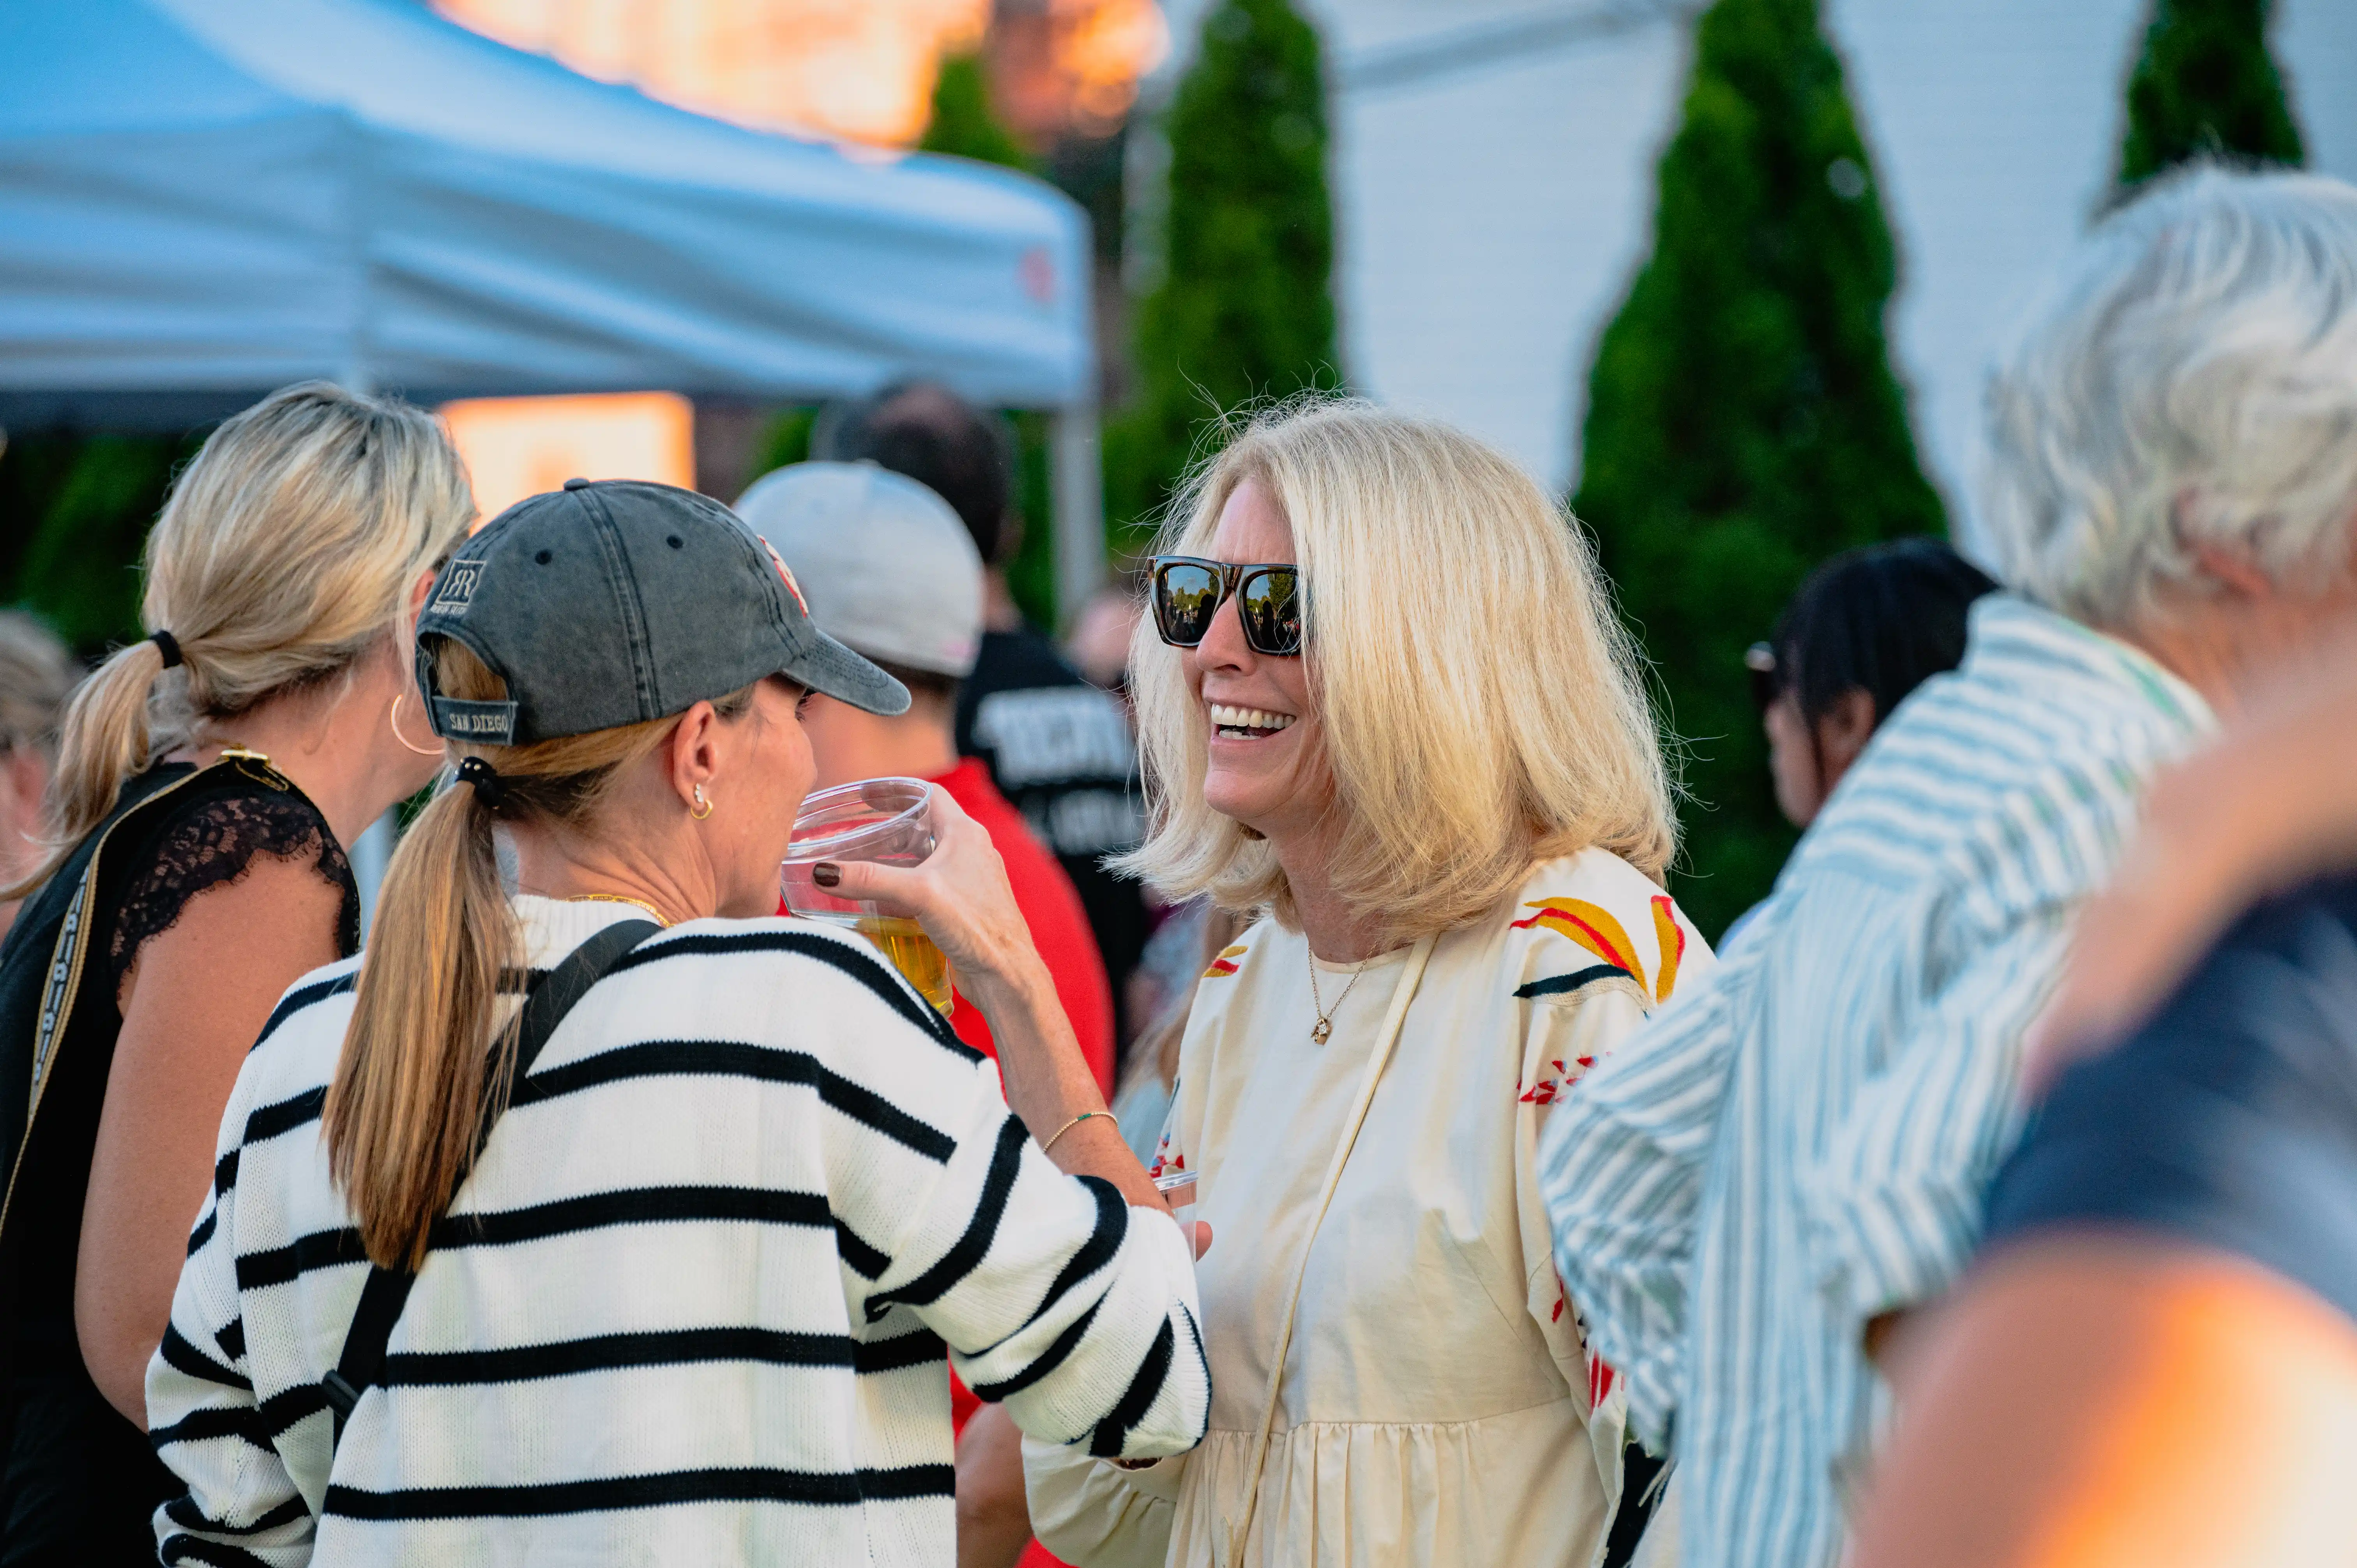 People socializing at an outdoor event with a woman smiling and conversing in the foreground.